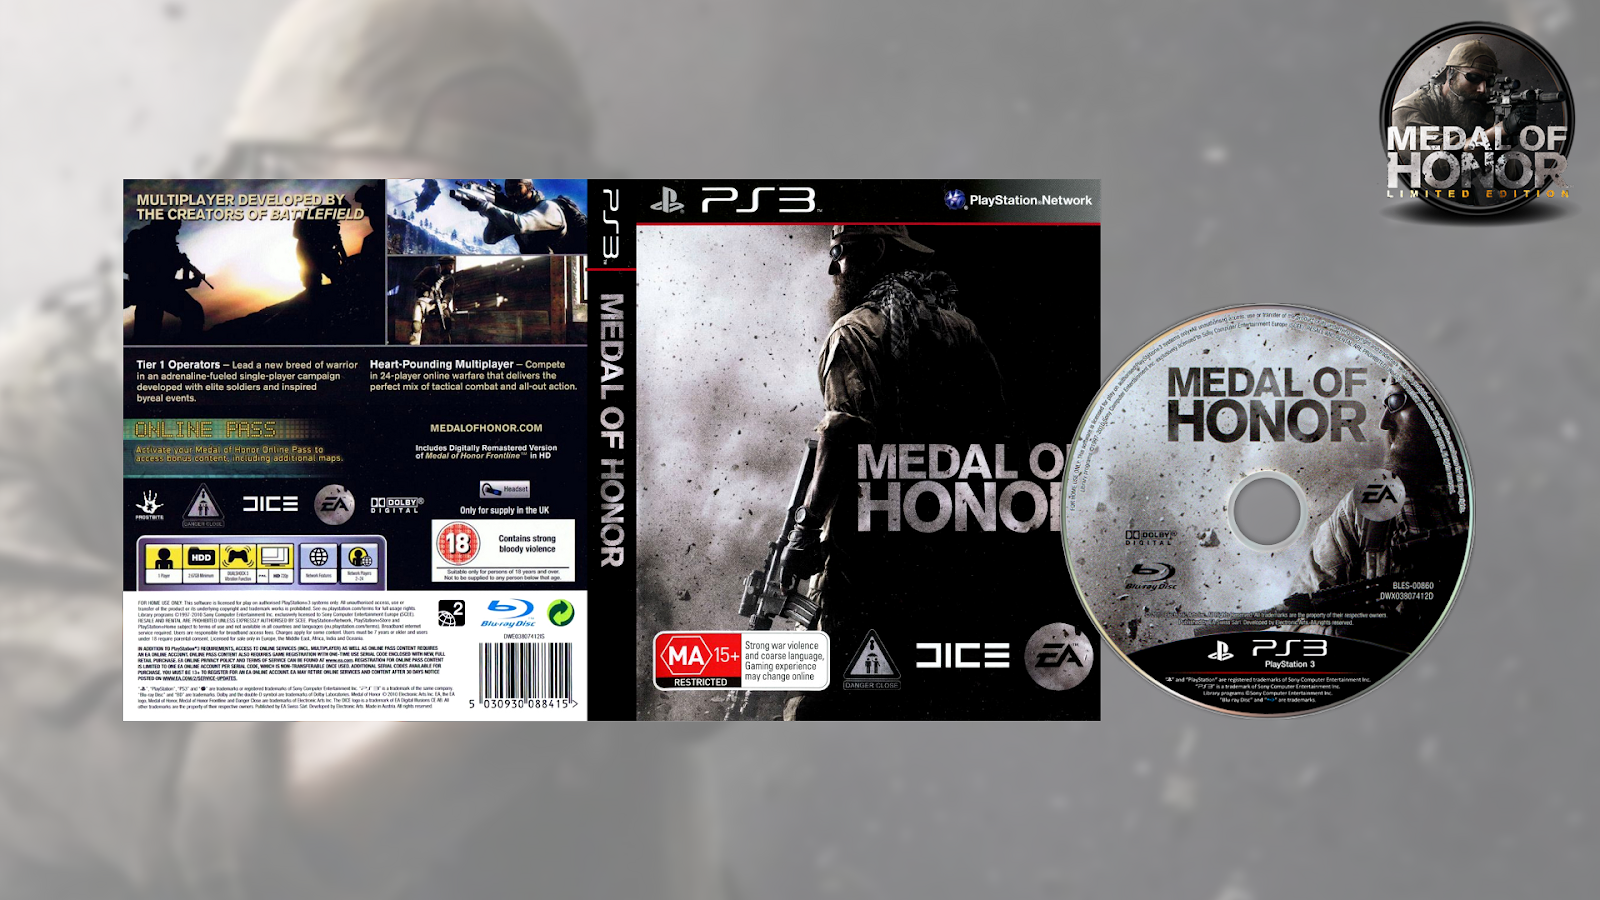 Medal of Honor Limited Edition ps3. Medal of Honor 2010 диск. Medal of Honor ps3 обложка. Медаль за отвагу на ps3. Medal of honor читы